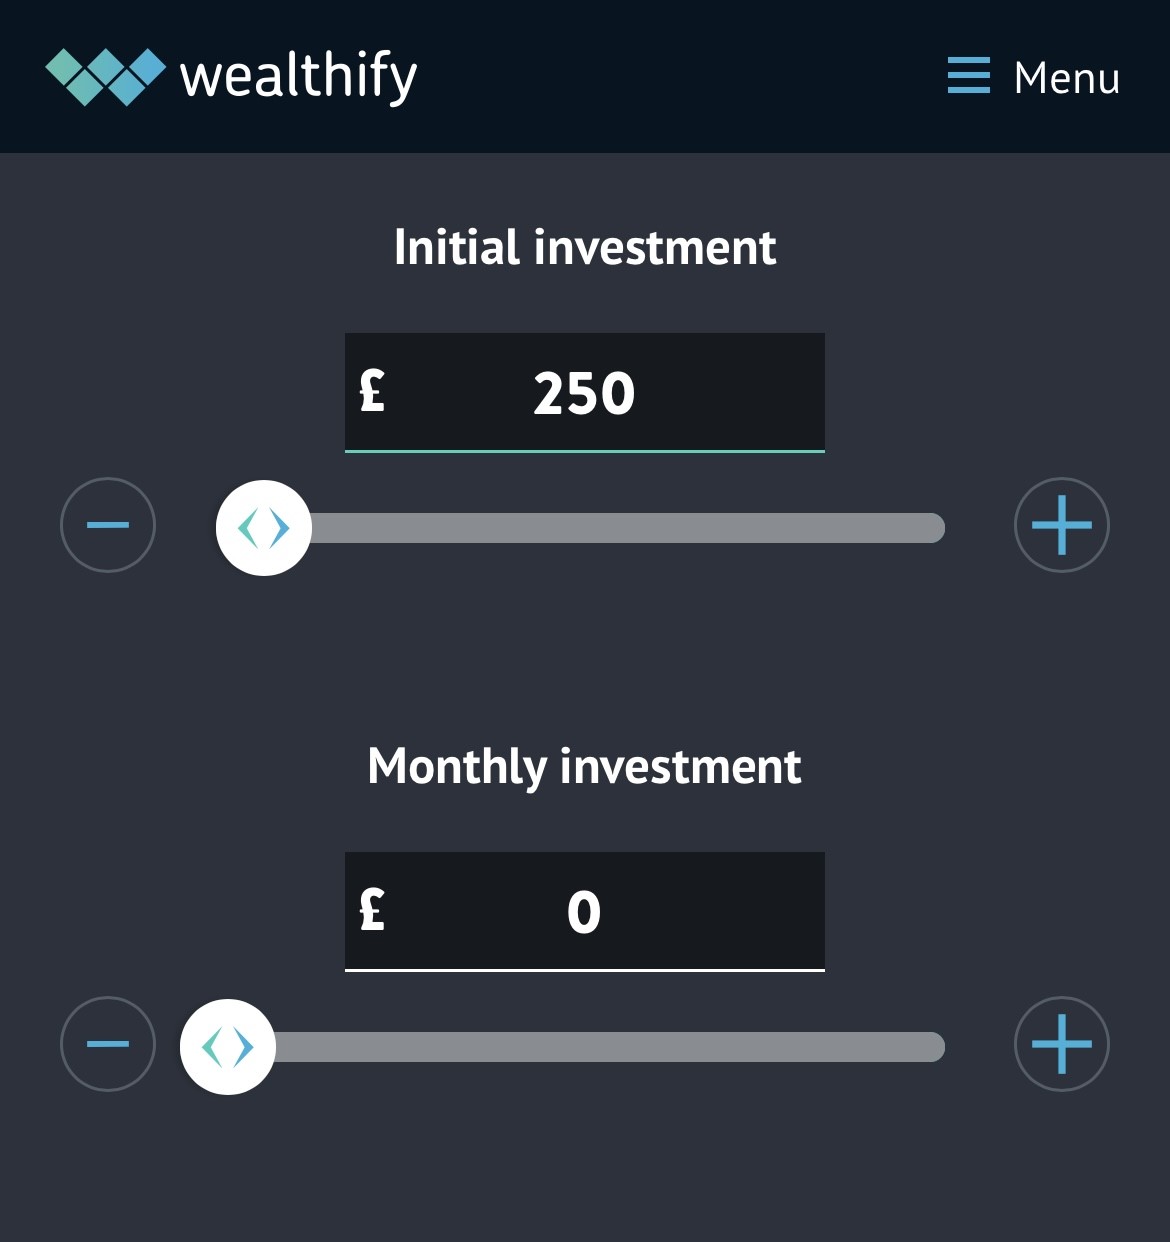 Choose Investment Amounts - deposit and monthly which is optional